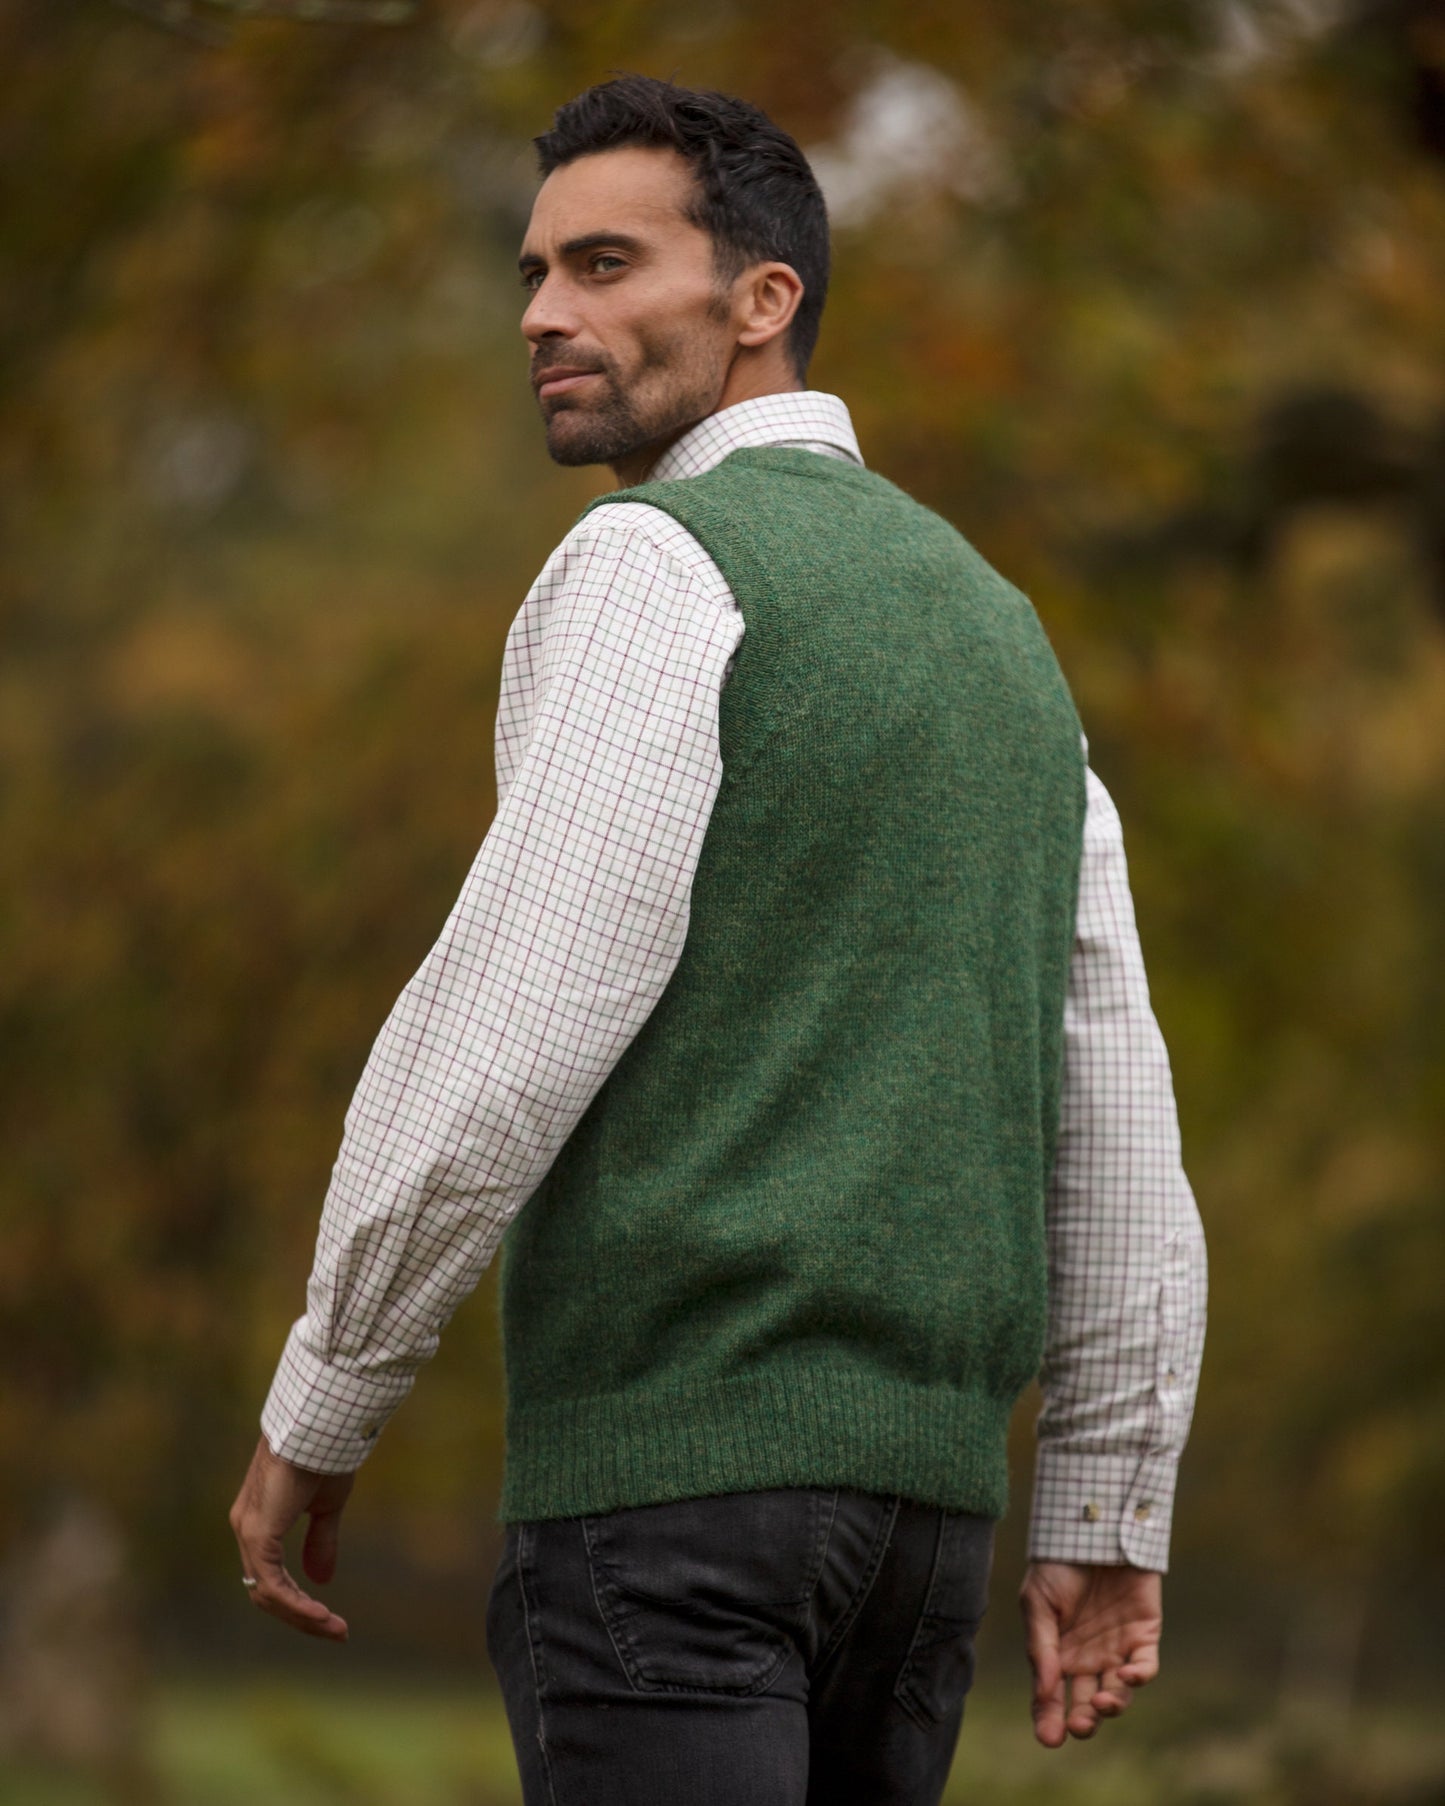 Vest, knitted, 100% alpaca wool, men's sleeveless sweater, warm knit pullover, natural fibres, v neck button down jersey, plastic free